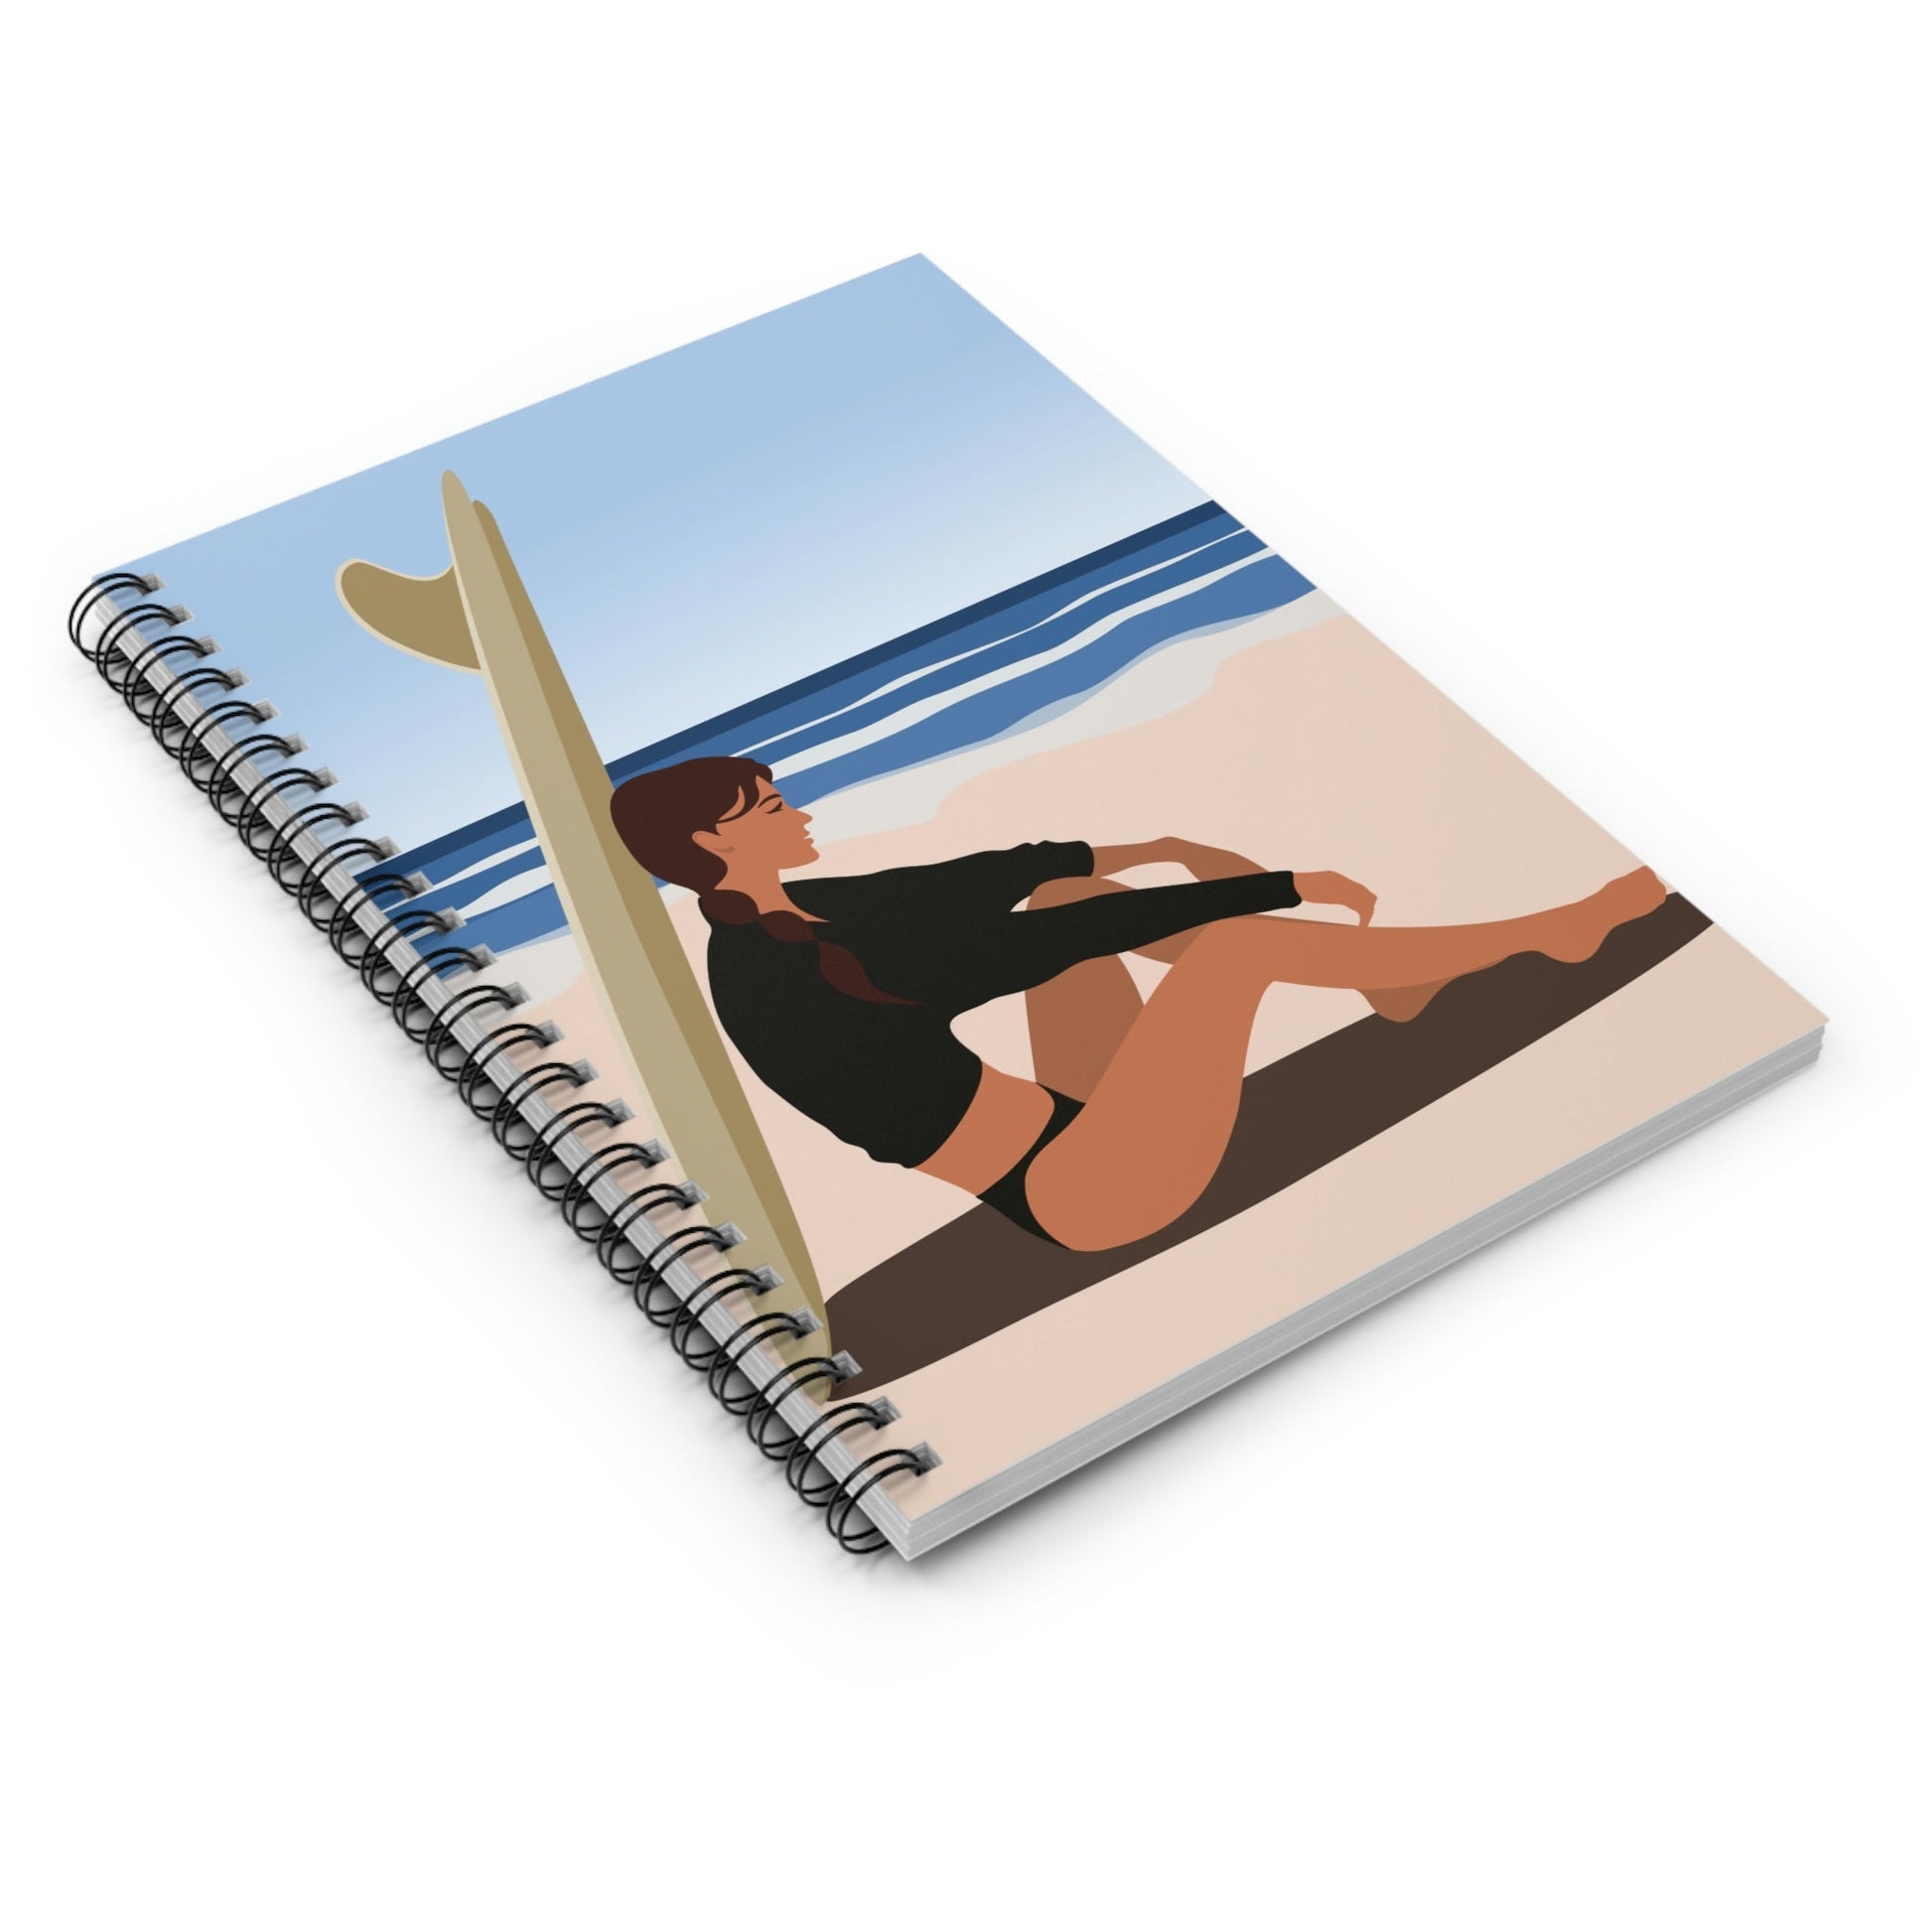 Serenity by the Sea Woman Sitting on Beach Spiral Notebook Ruled Line Ichaku [Perfect Gifts Selection]